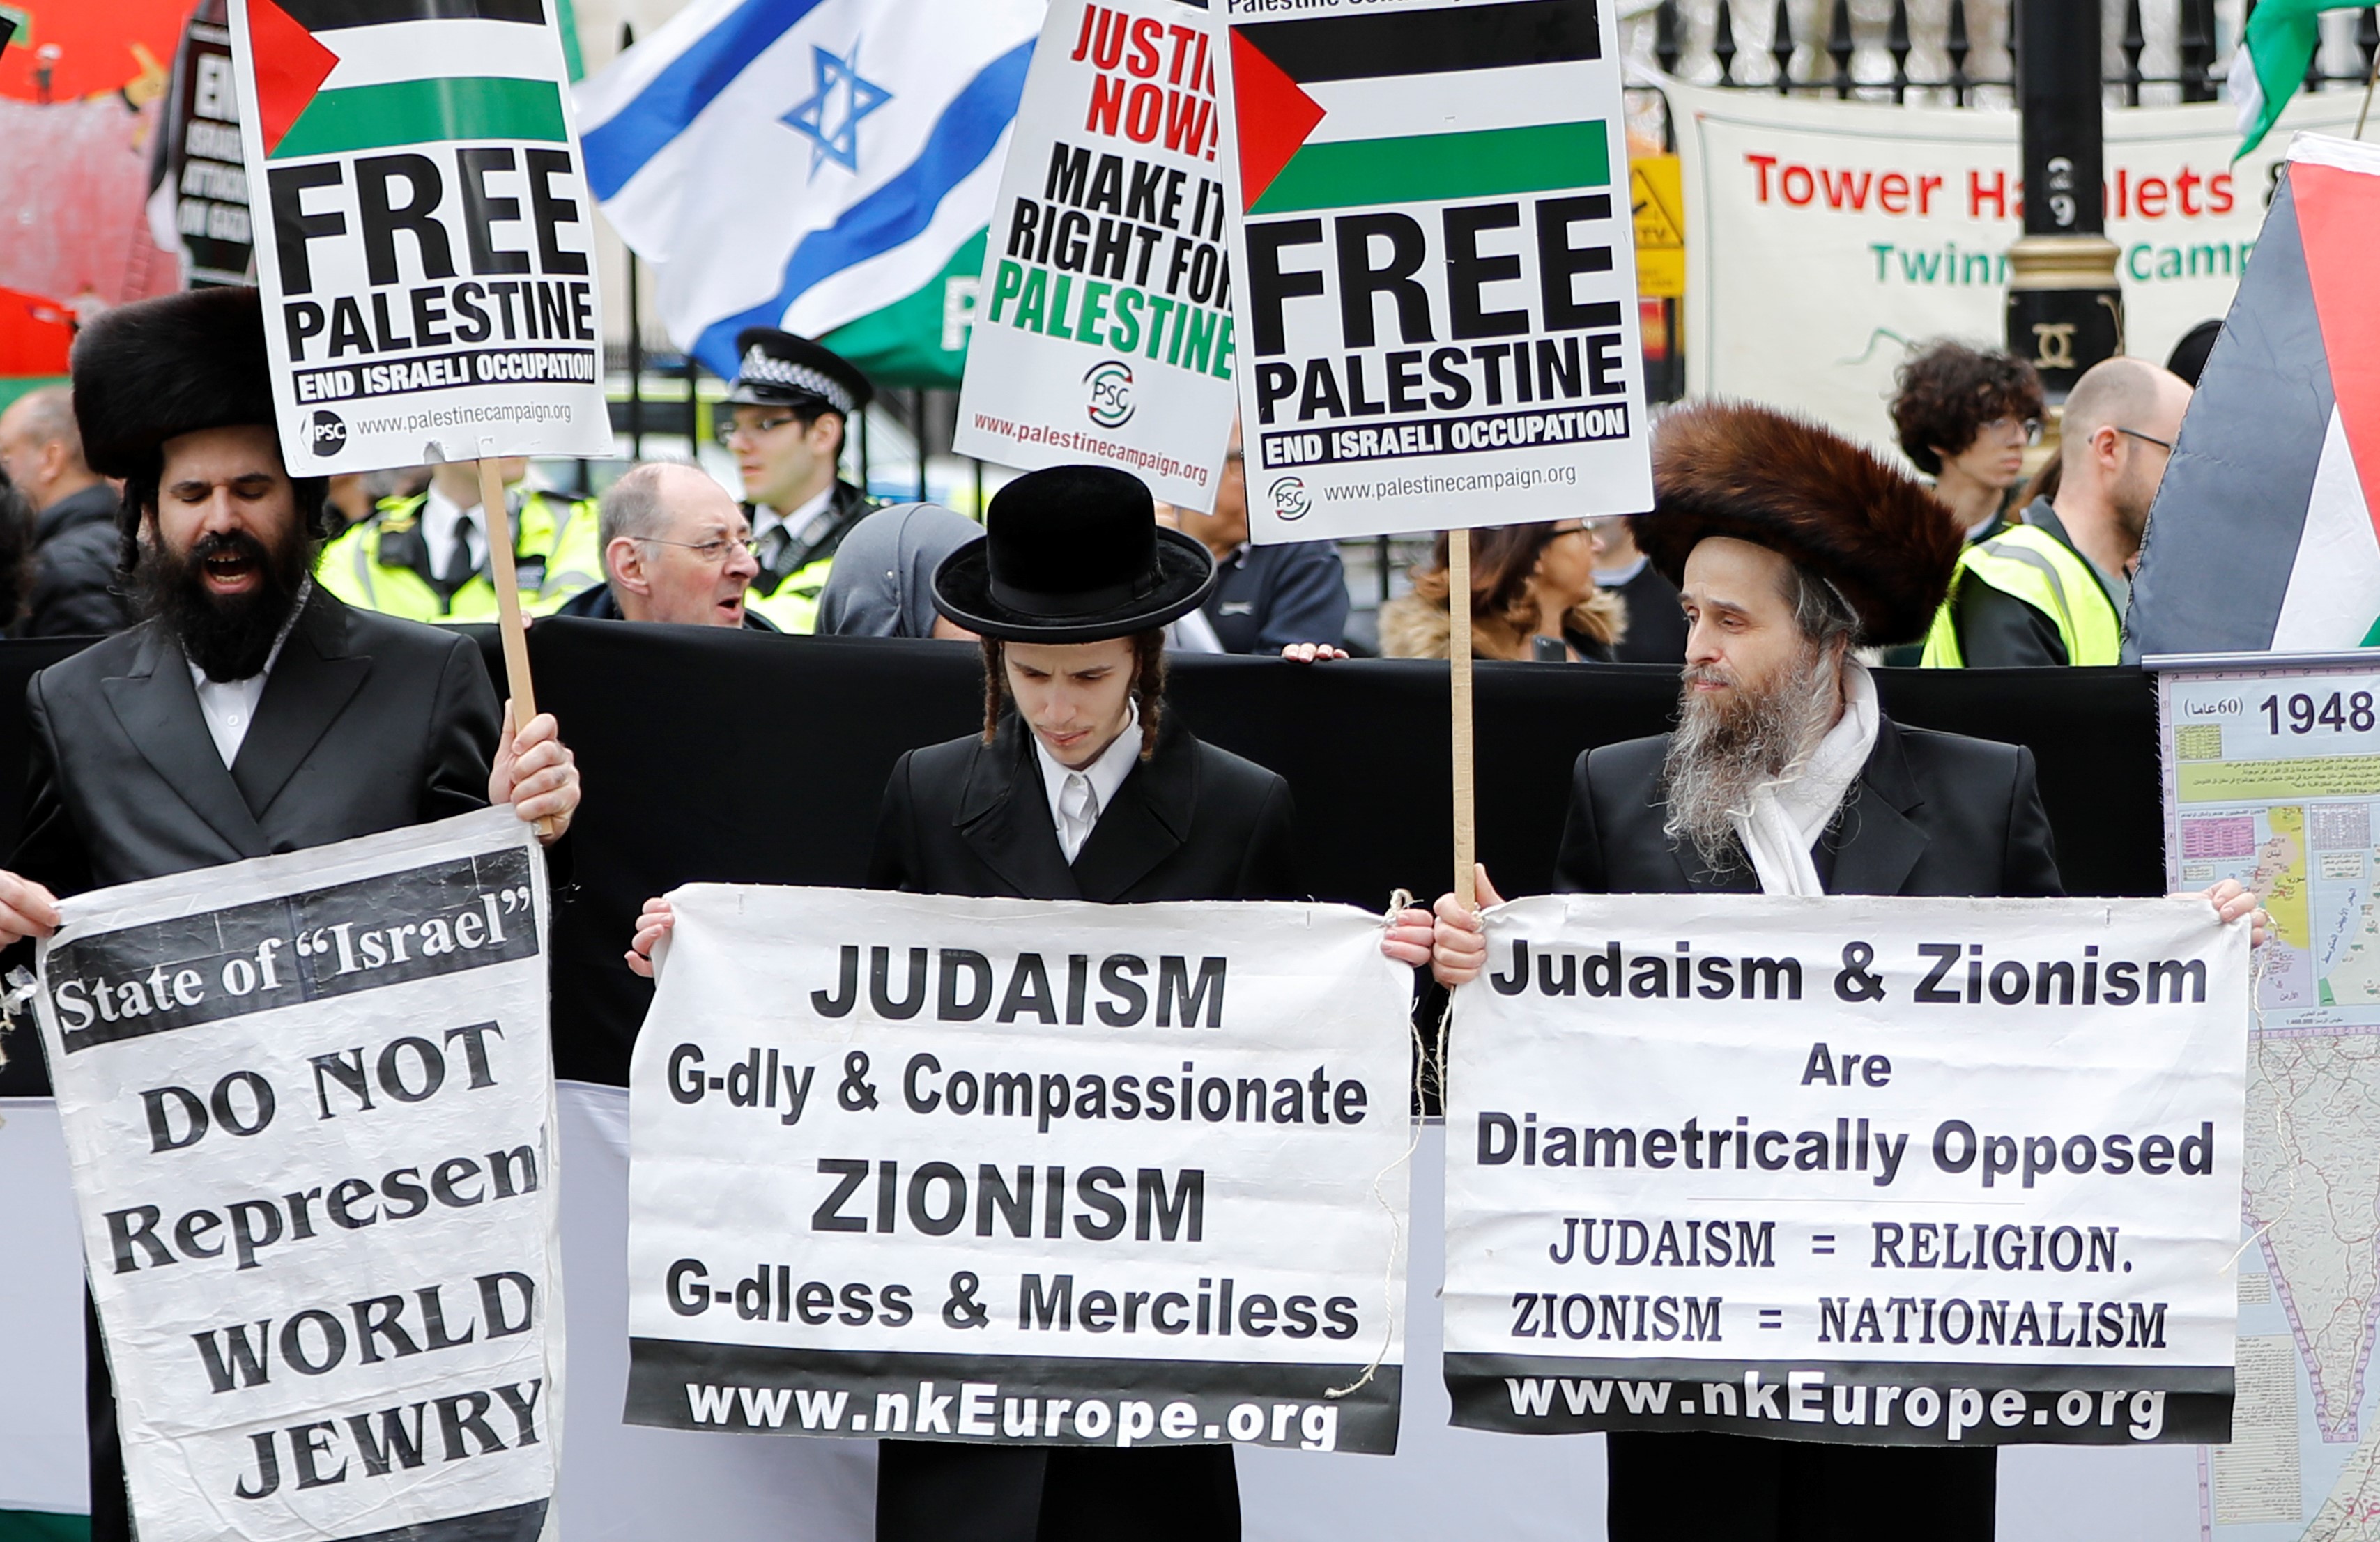 Ultra-Orthodox Jewish anti-Zionism protesters join a demonstration in central London in support of Palestinians in Gaza on 7 April 2018 (AFP)